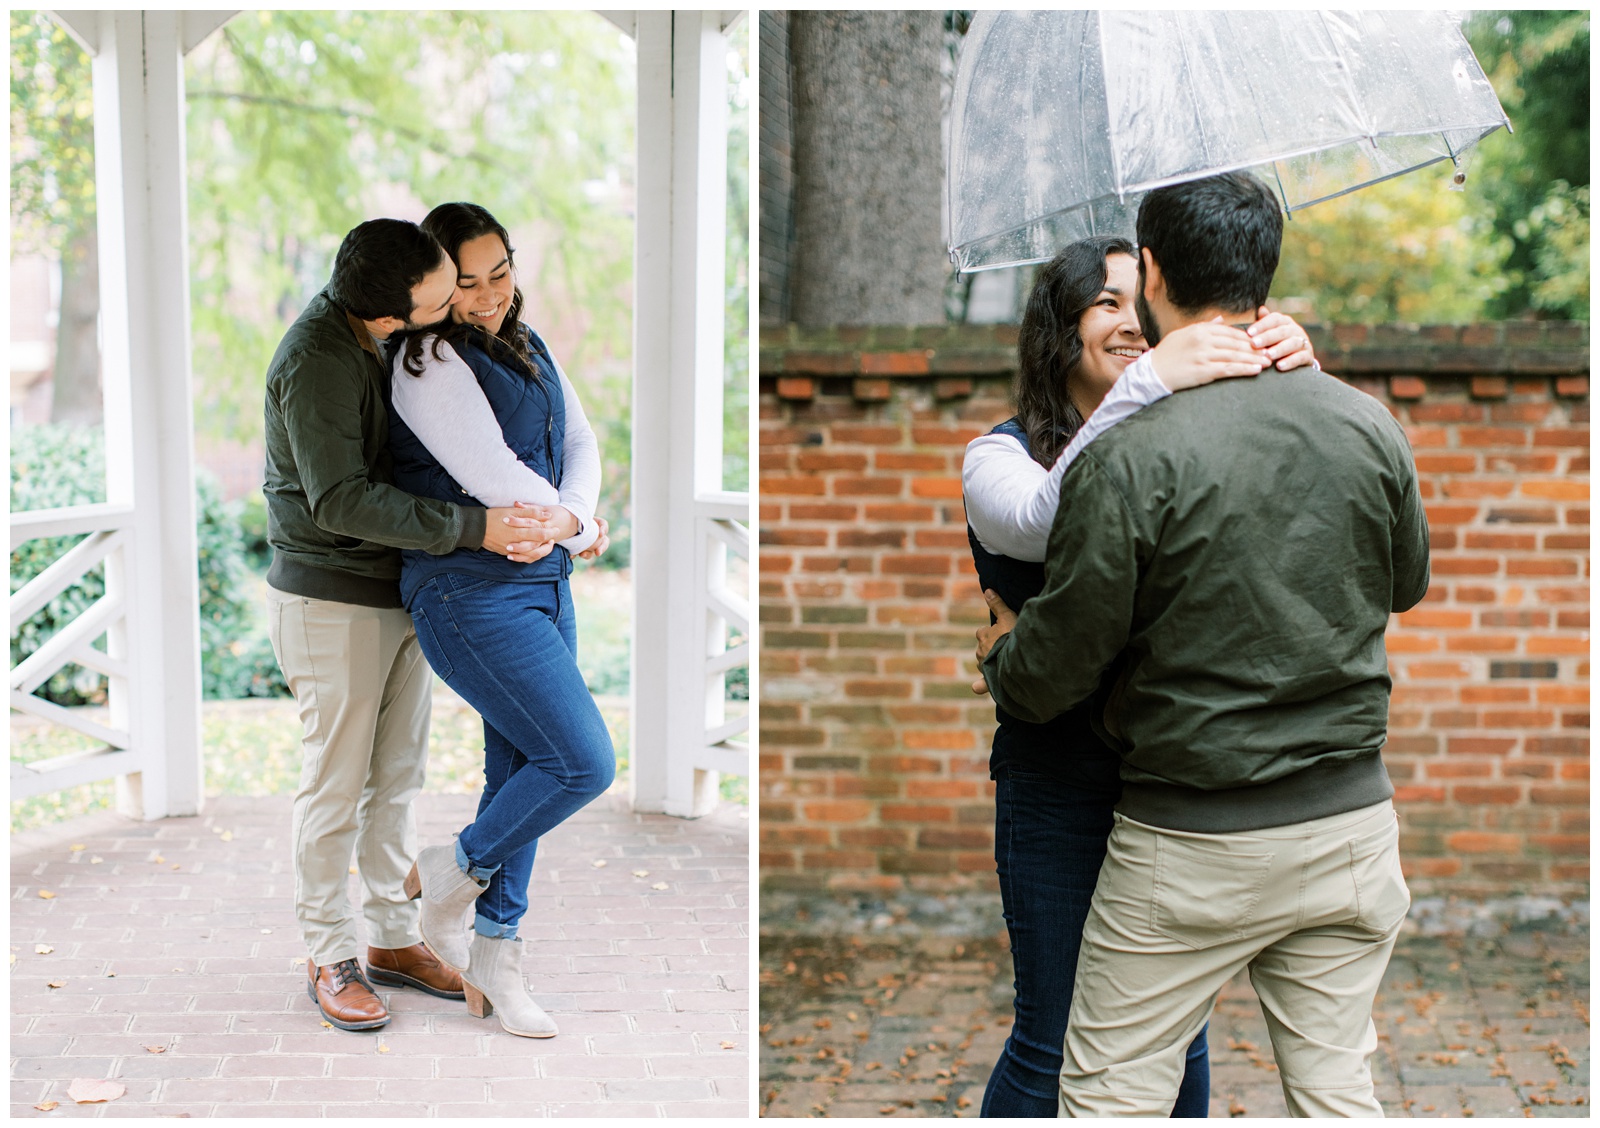 Why Rain Won't Ruin Your Engagement Session